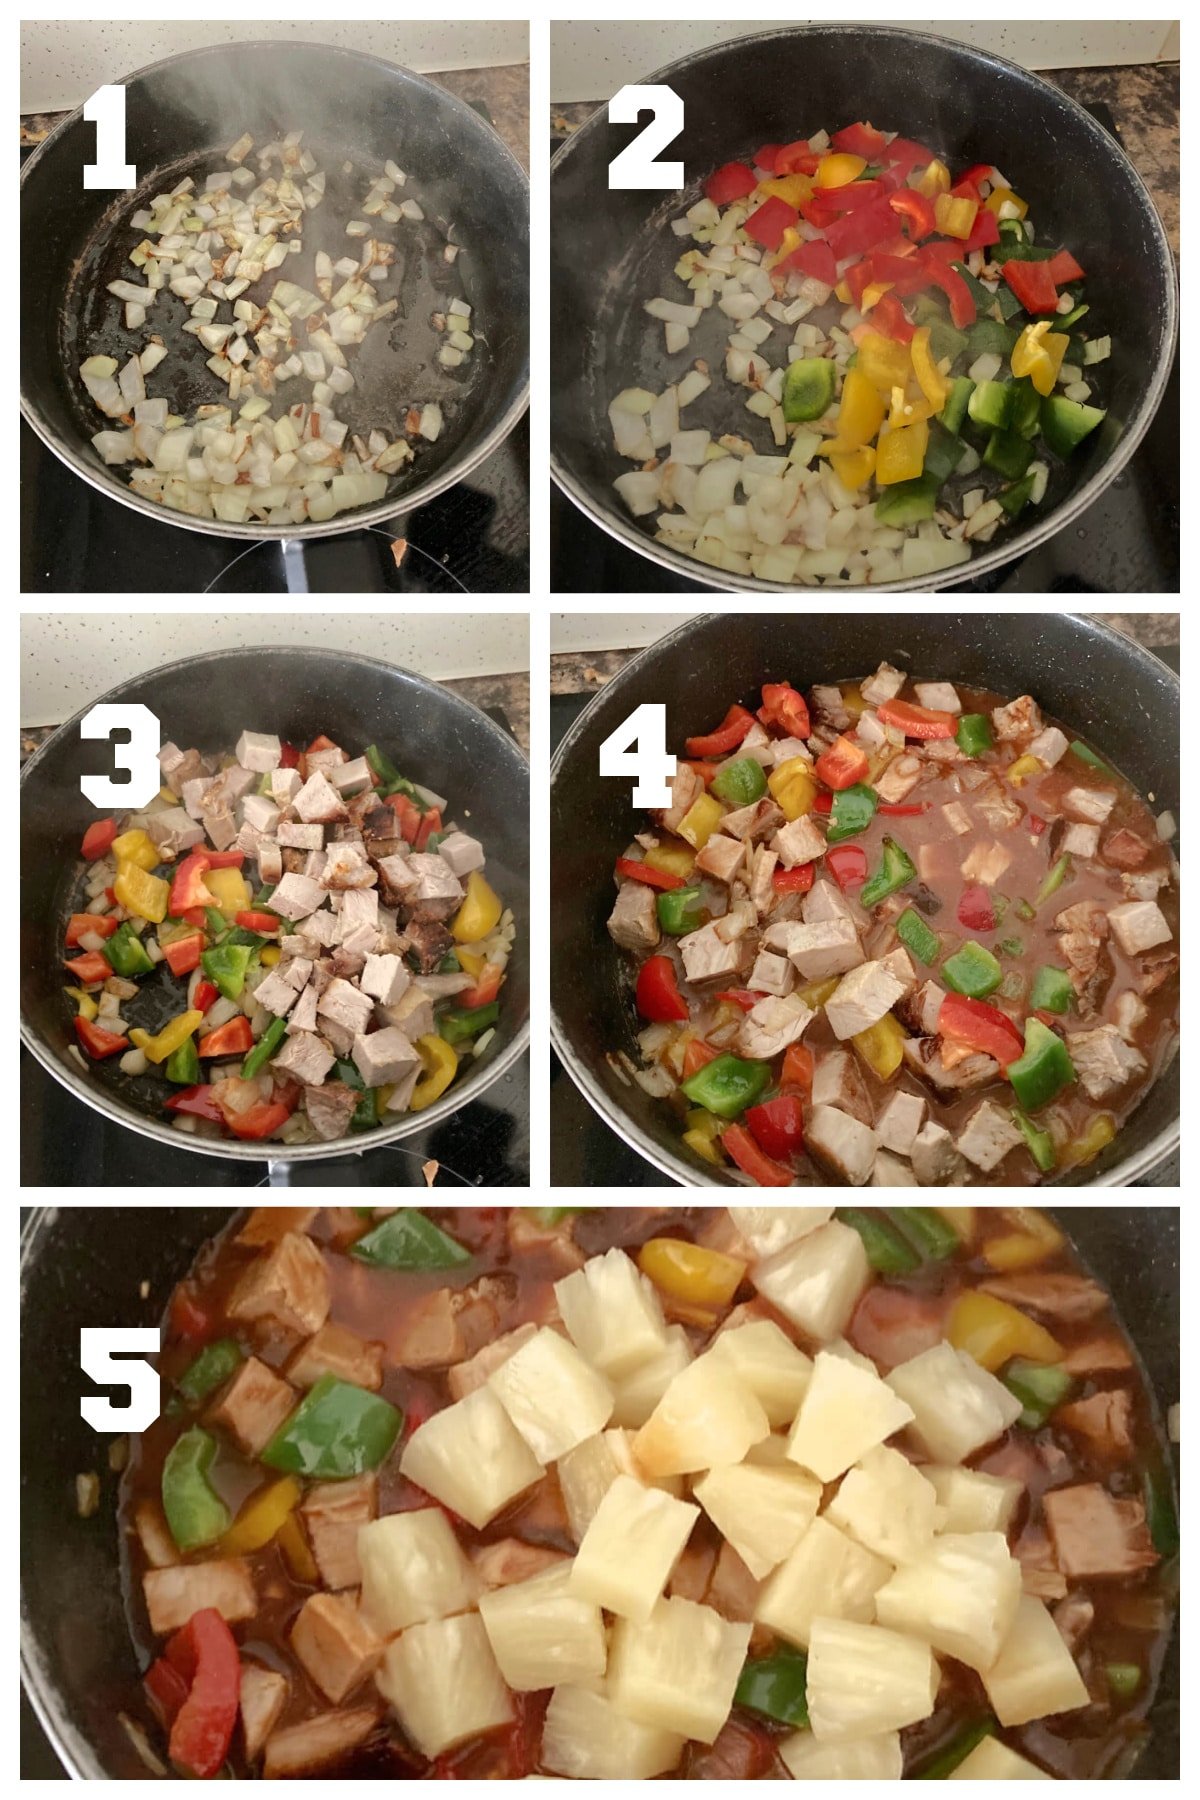 Collage of 5 photos to show how to make sweet and sour pork.